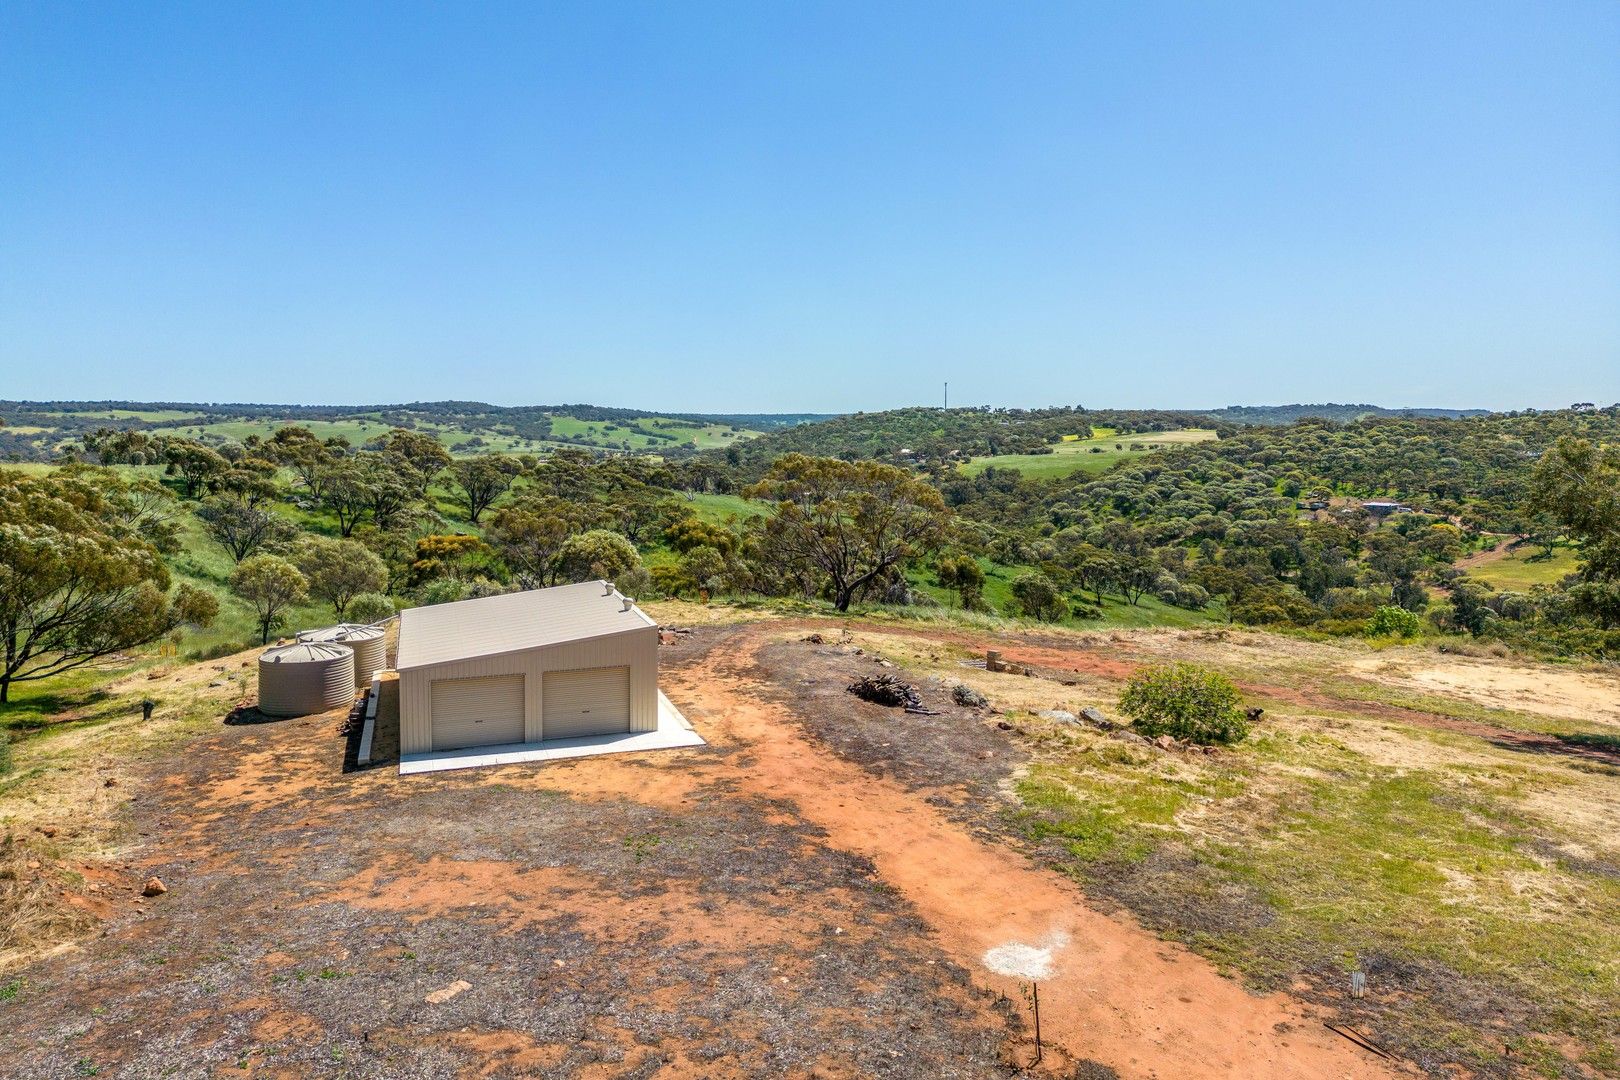 159 Coondle Dr, Coondle WA 6566, Image 0